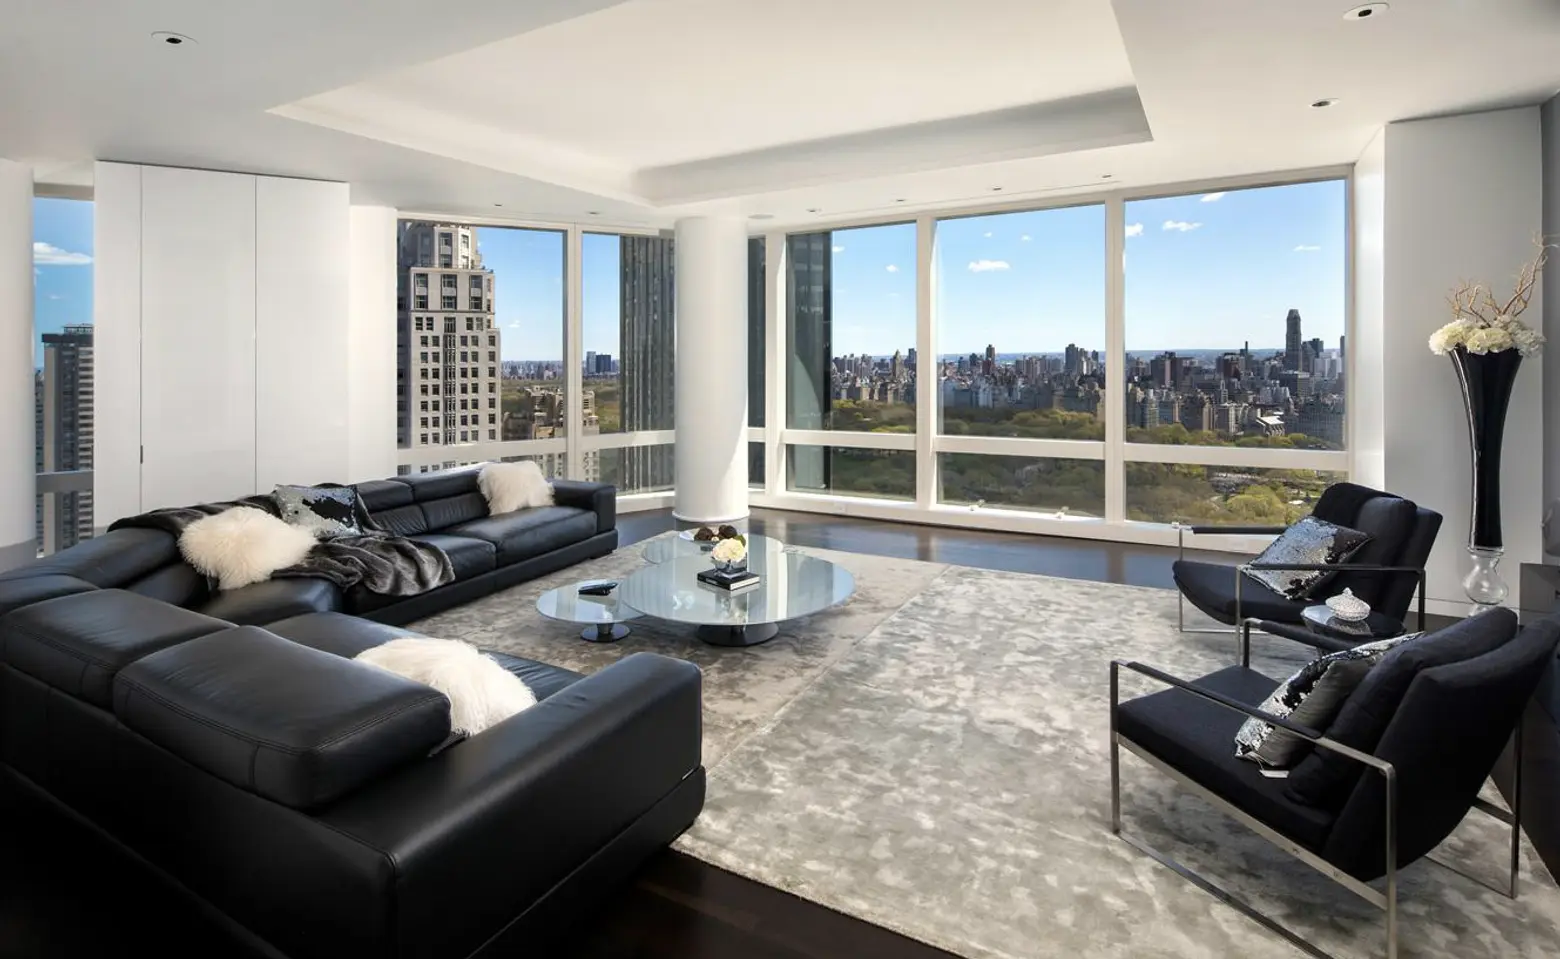 Ben Affleck Spotted Checking Out a $25M Time Warner Center Condo